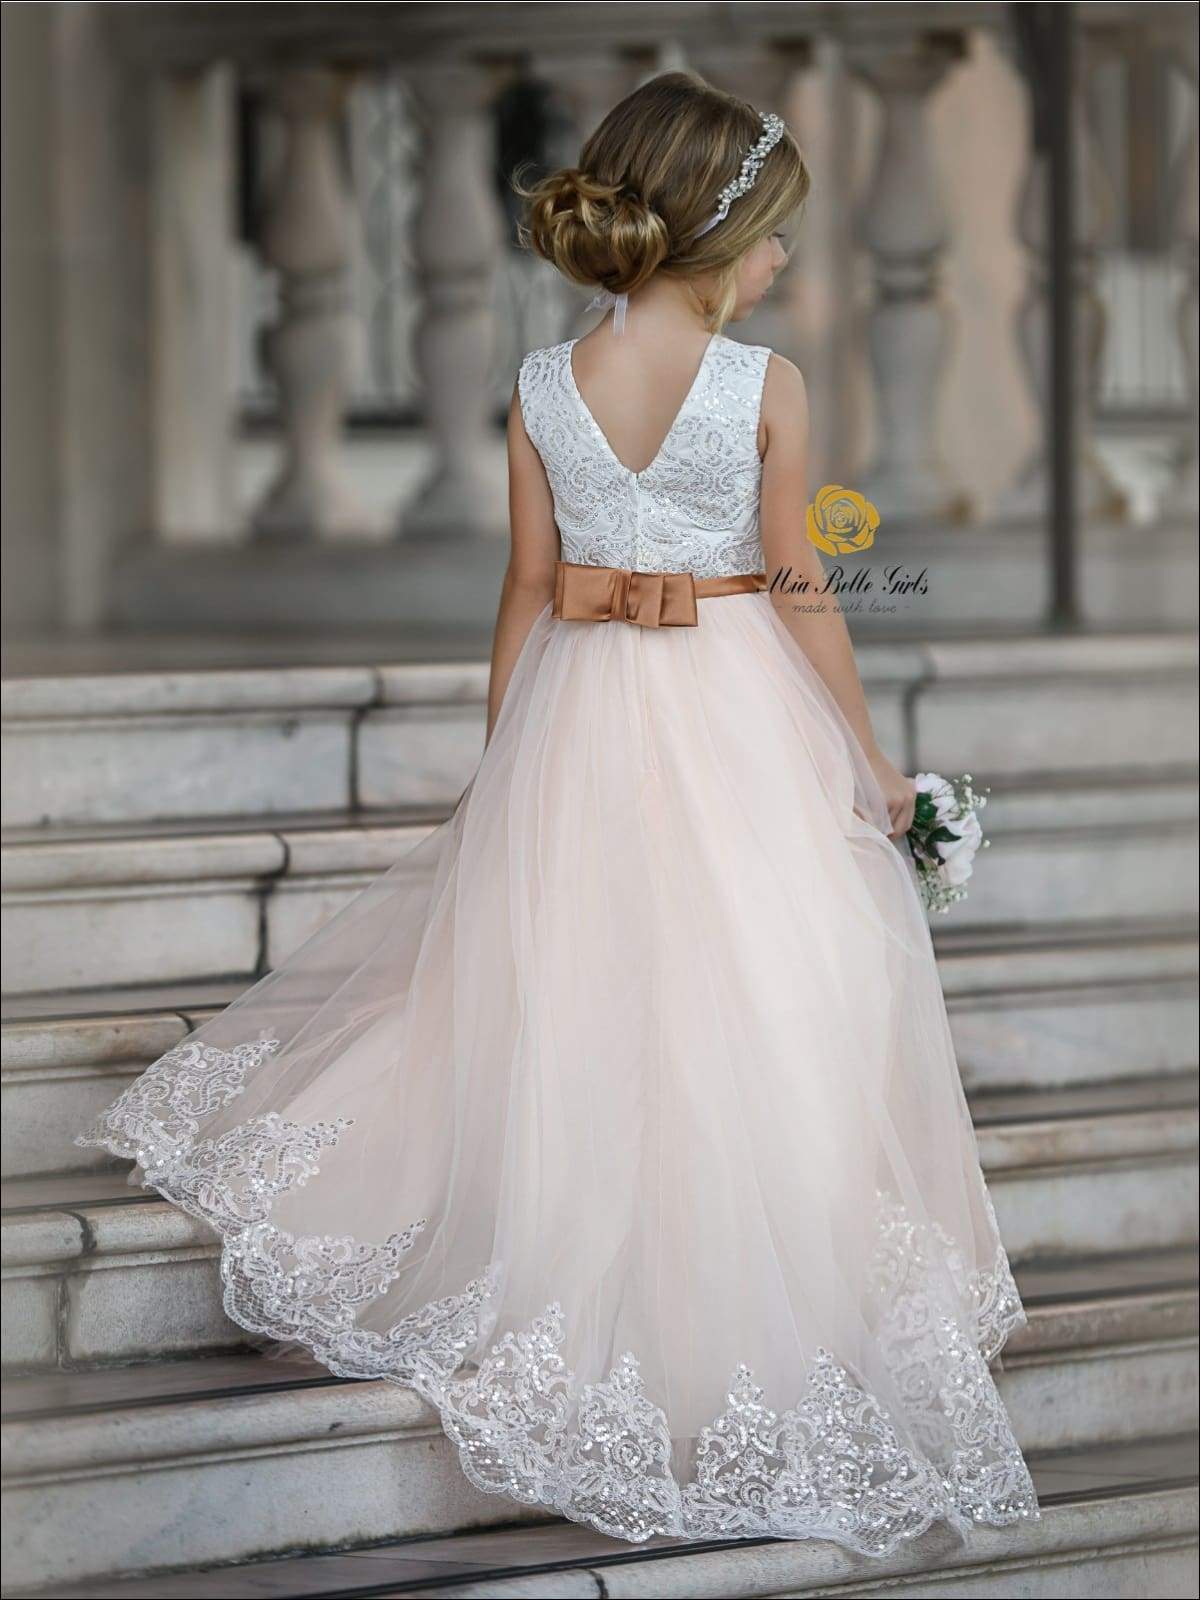 Girls Communion Dresses | Sequin Bodice Lace Beige Tulle Skirt Gown